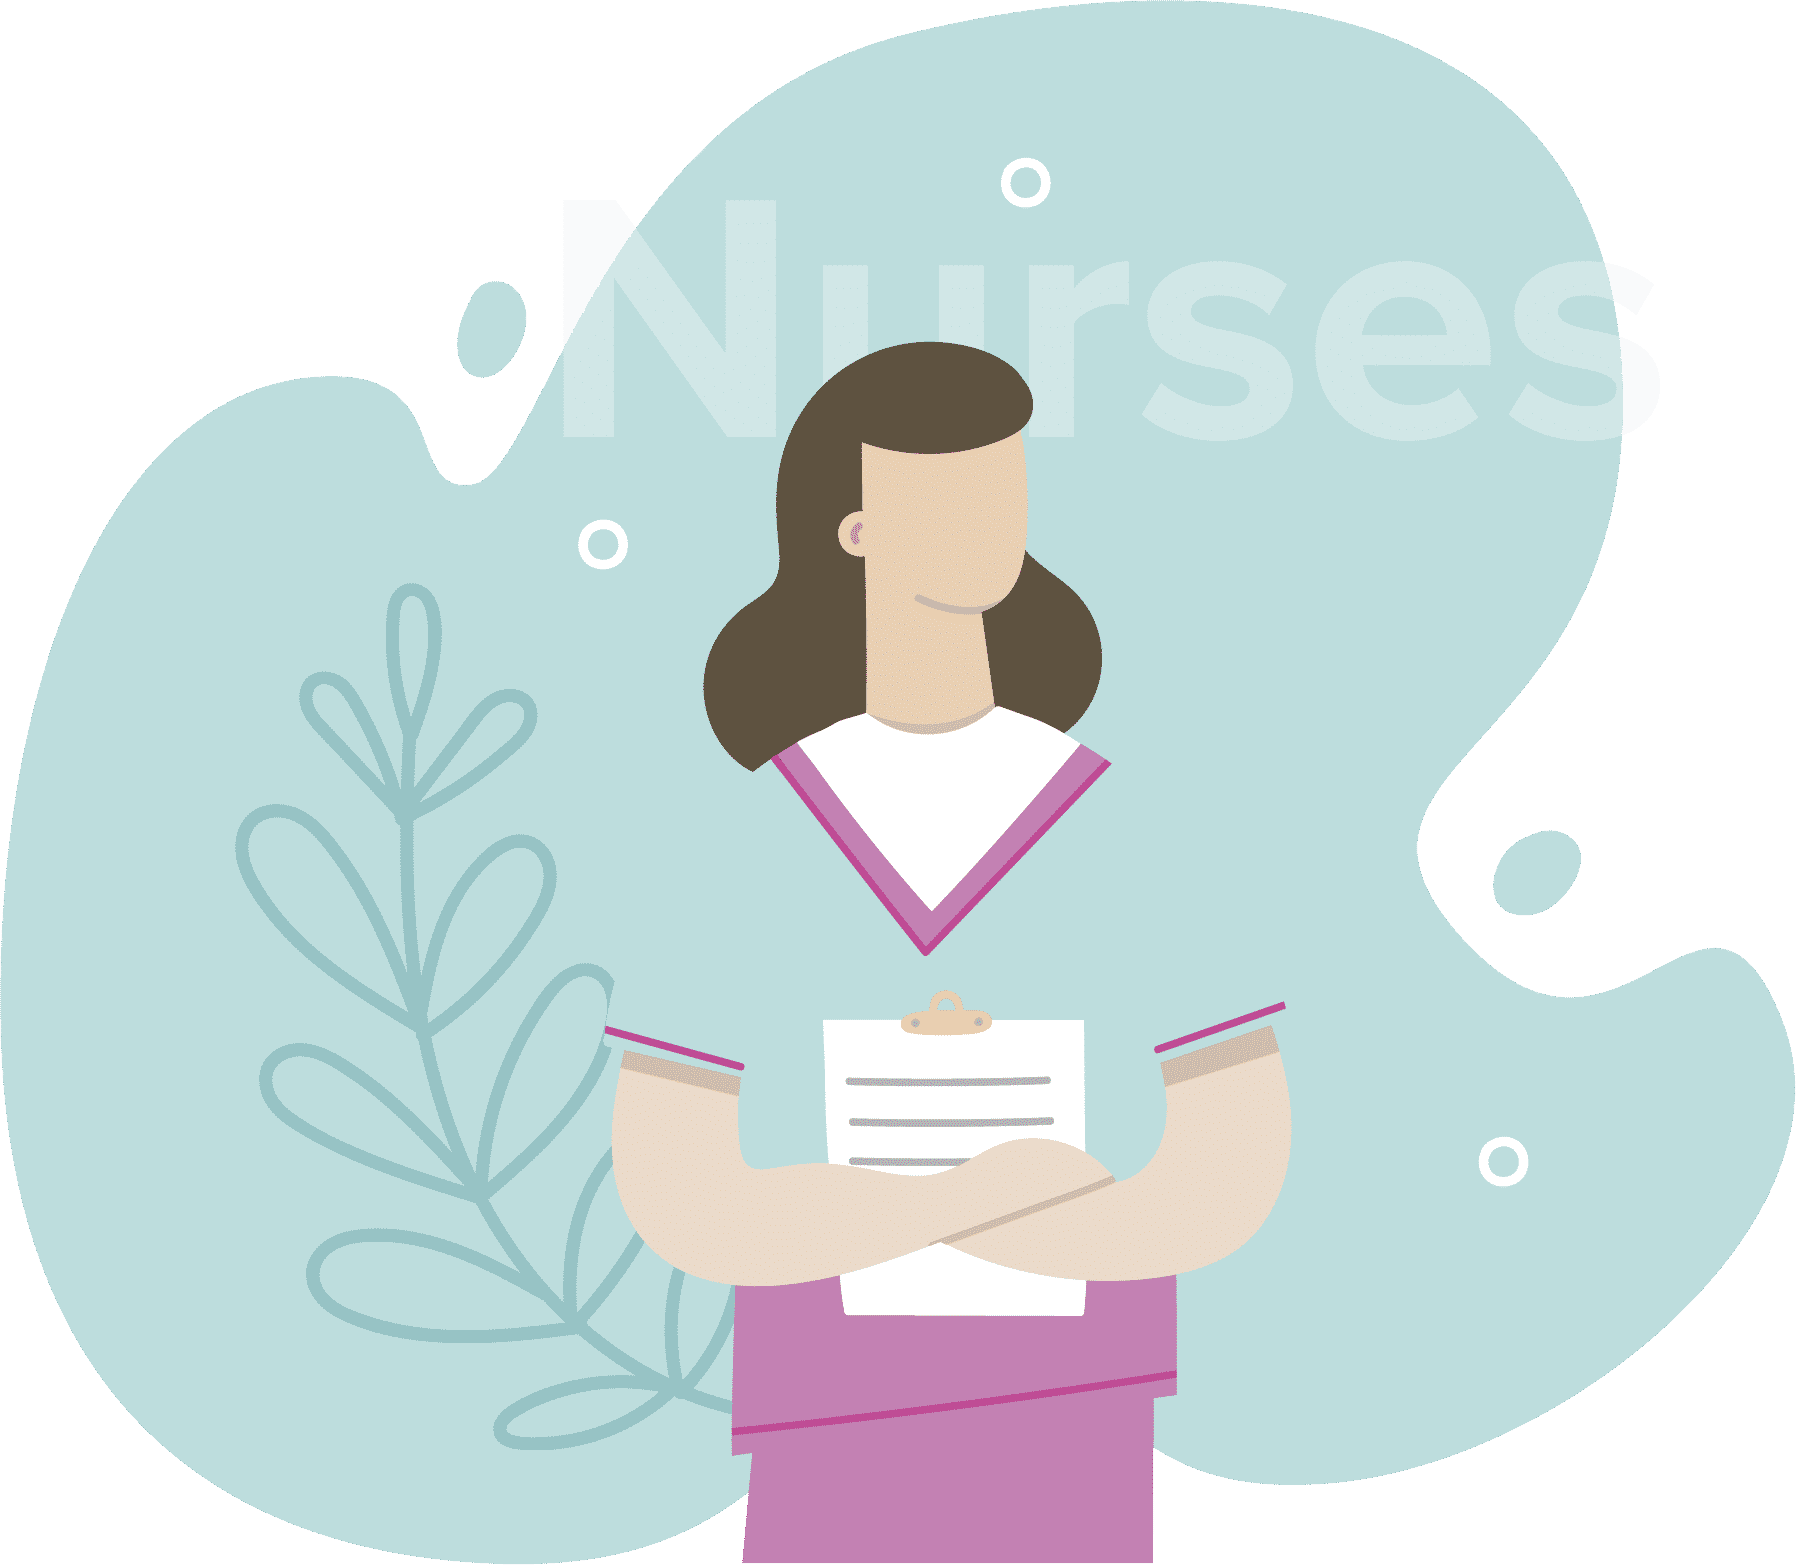 Nurse with a clipboard in front of the word Nurses